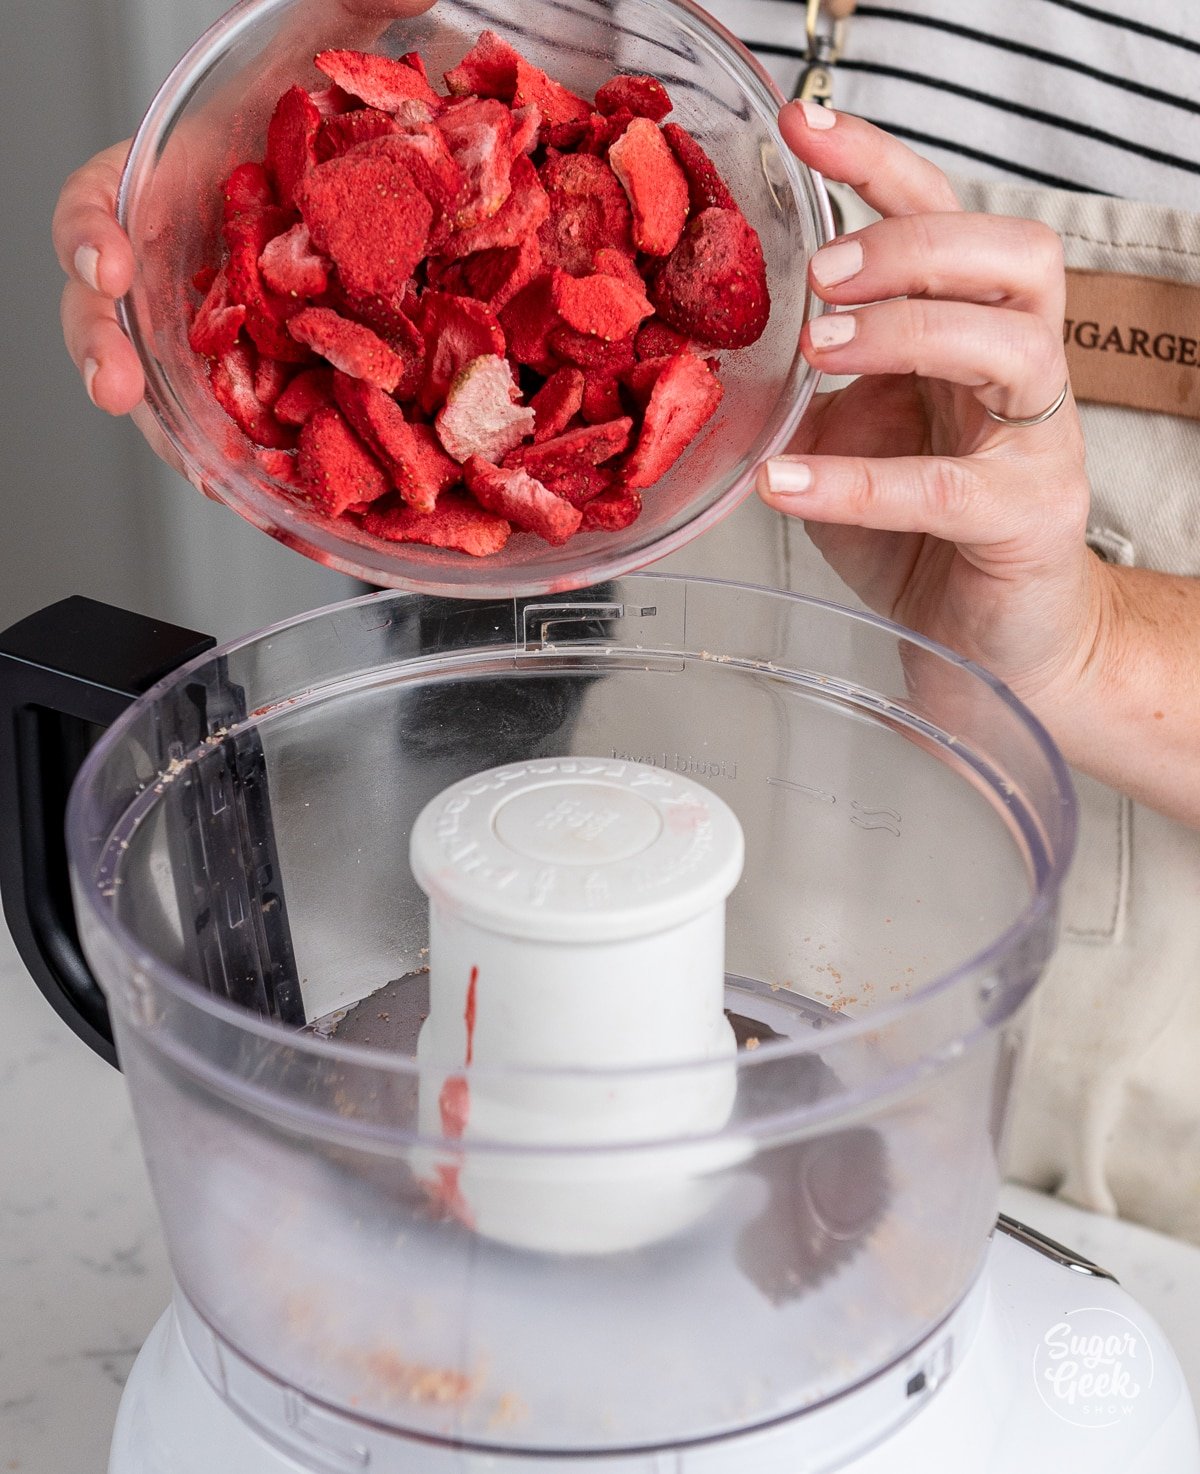 hands pouring freeze dried strawberries into a food processor.